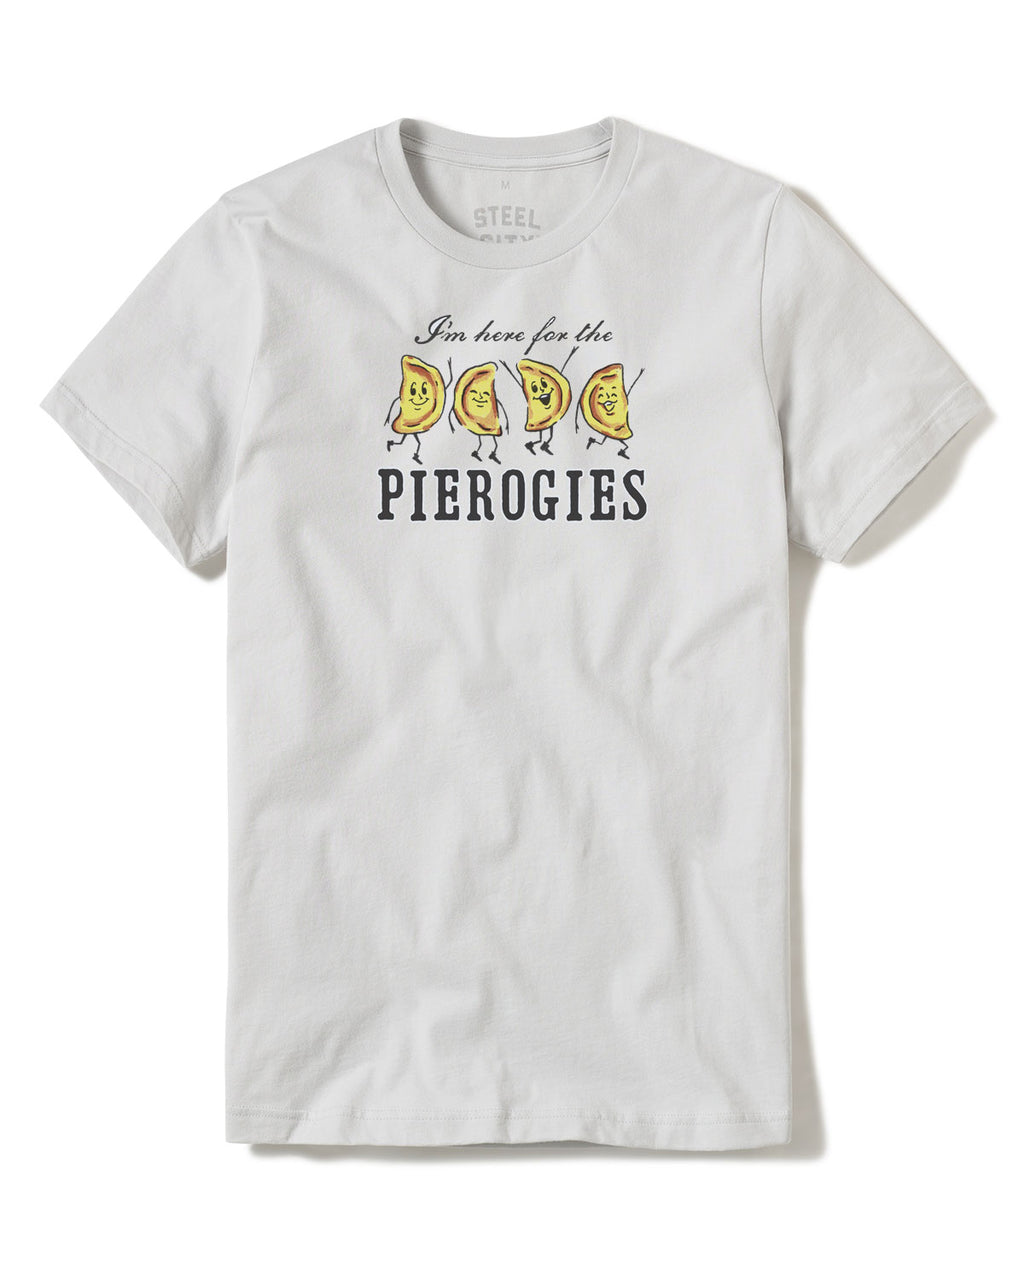 I'm Here for the Pierogies T-shirt, Steel City